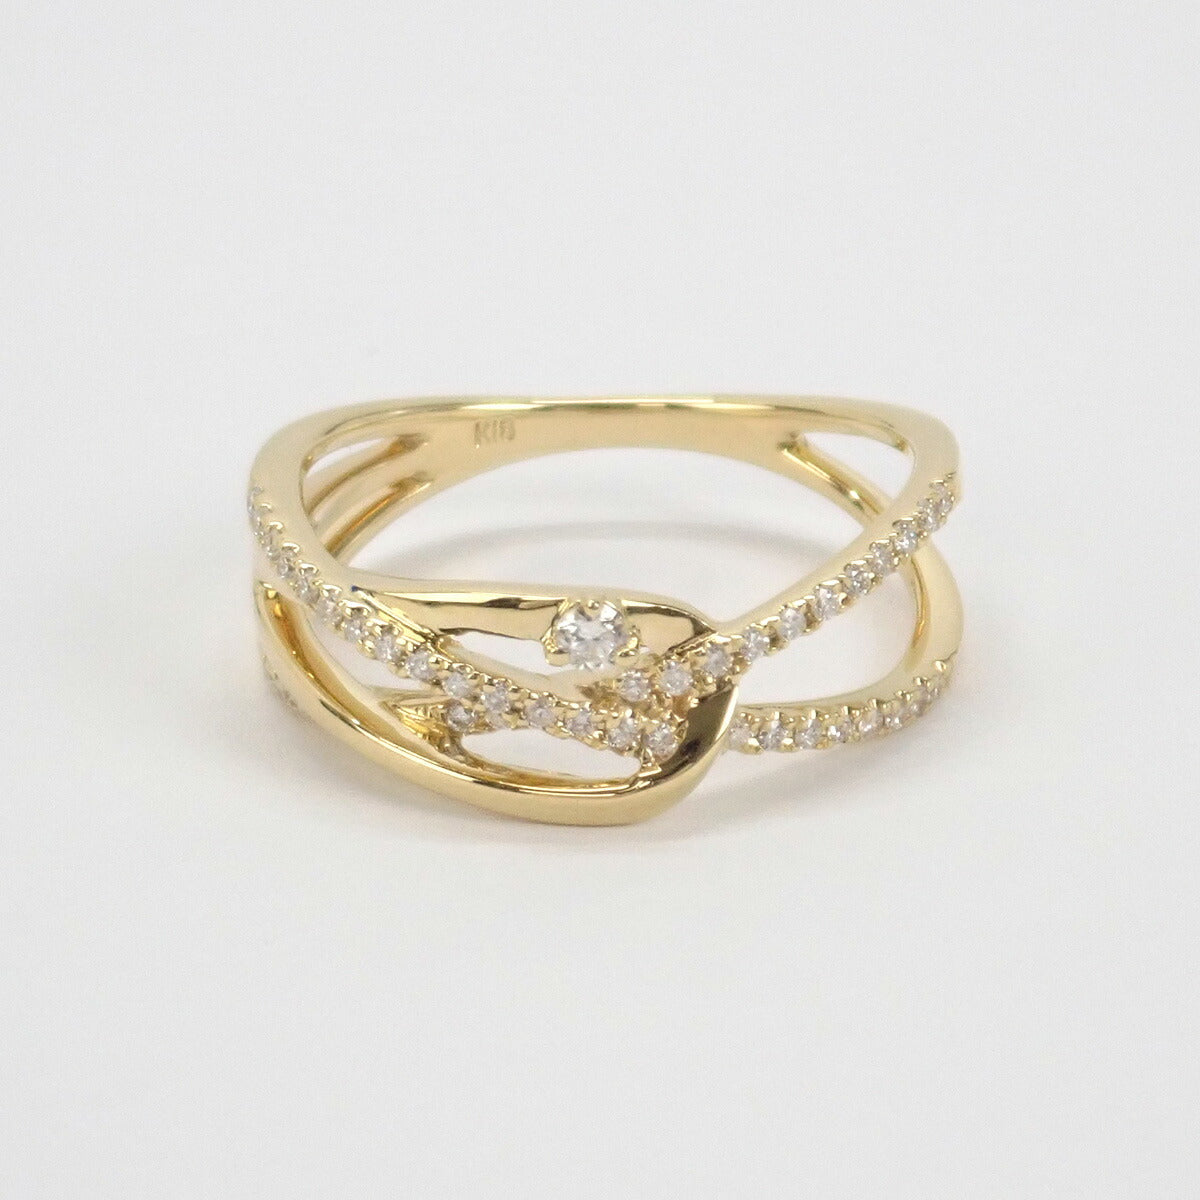 [LuxUness]  K18YG Diamond Ring, Size 14.5, Yellow Gold Finish, Ladies (Pre-owned) in Excellent condition